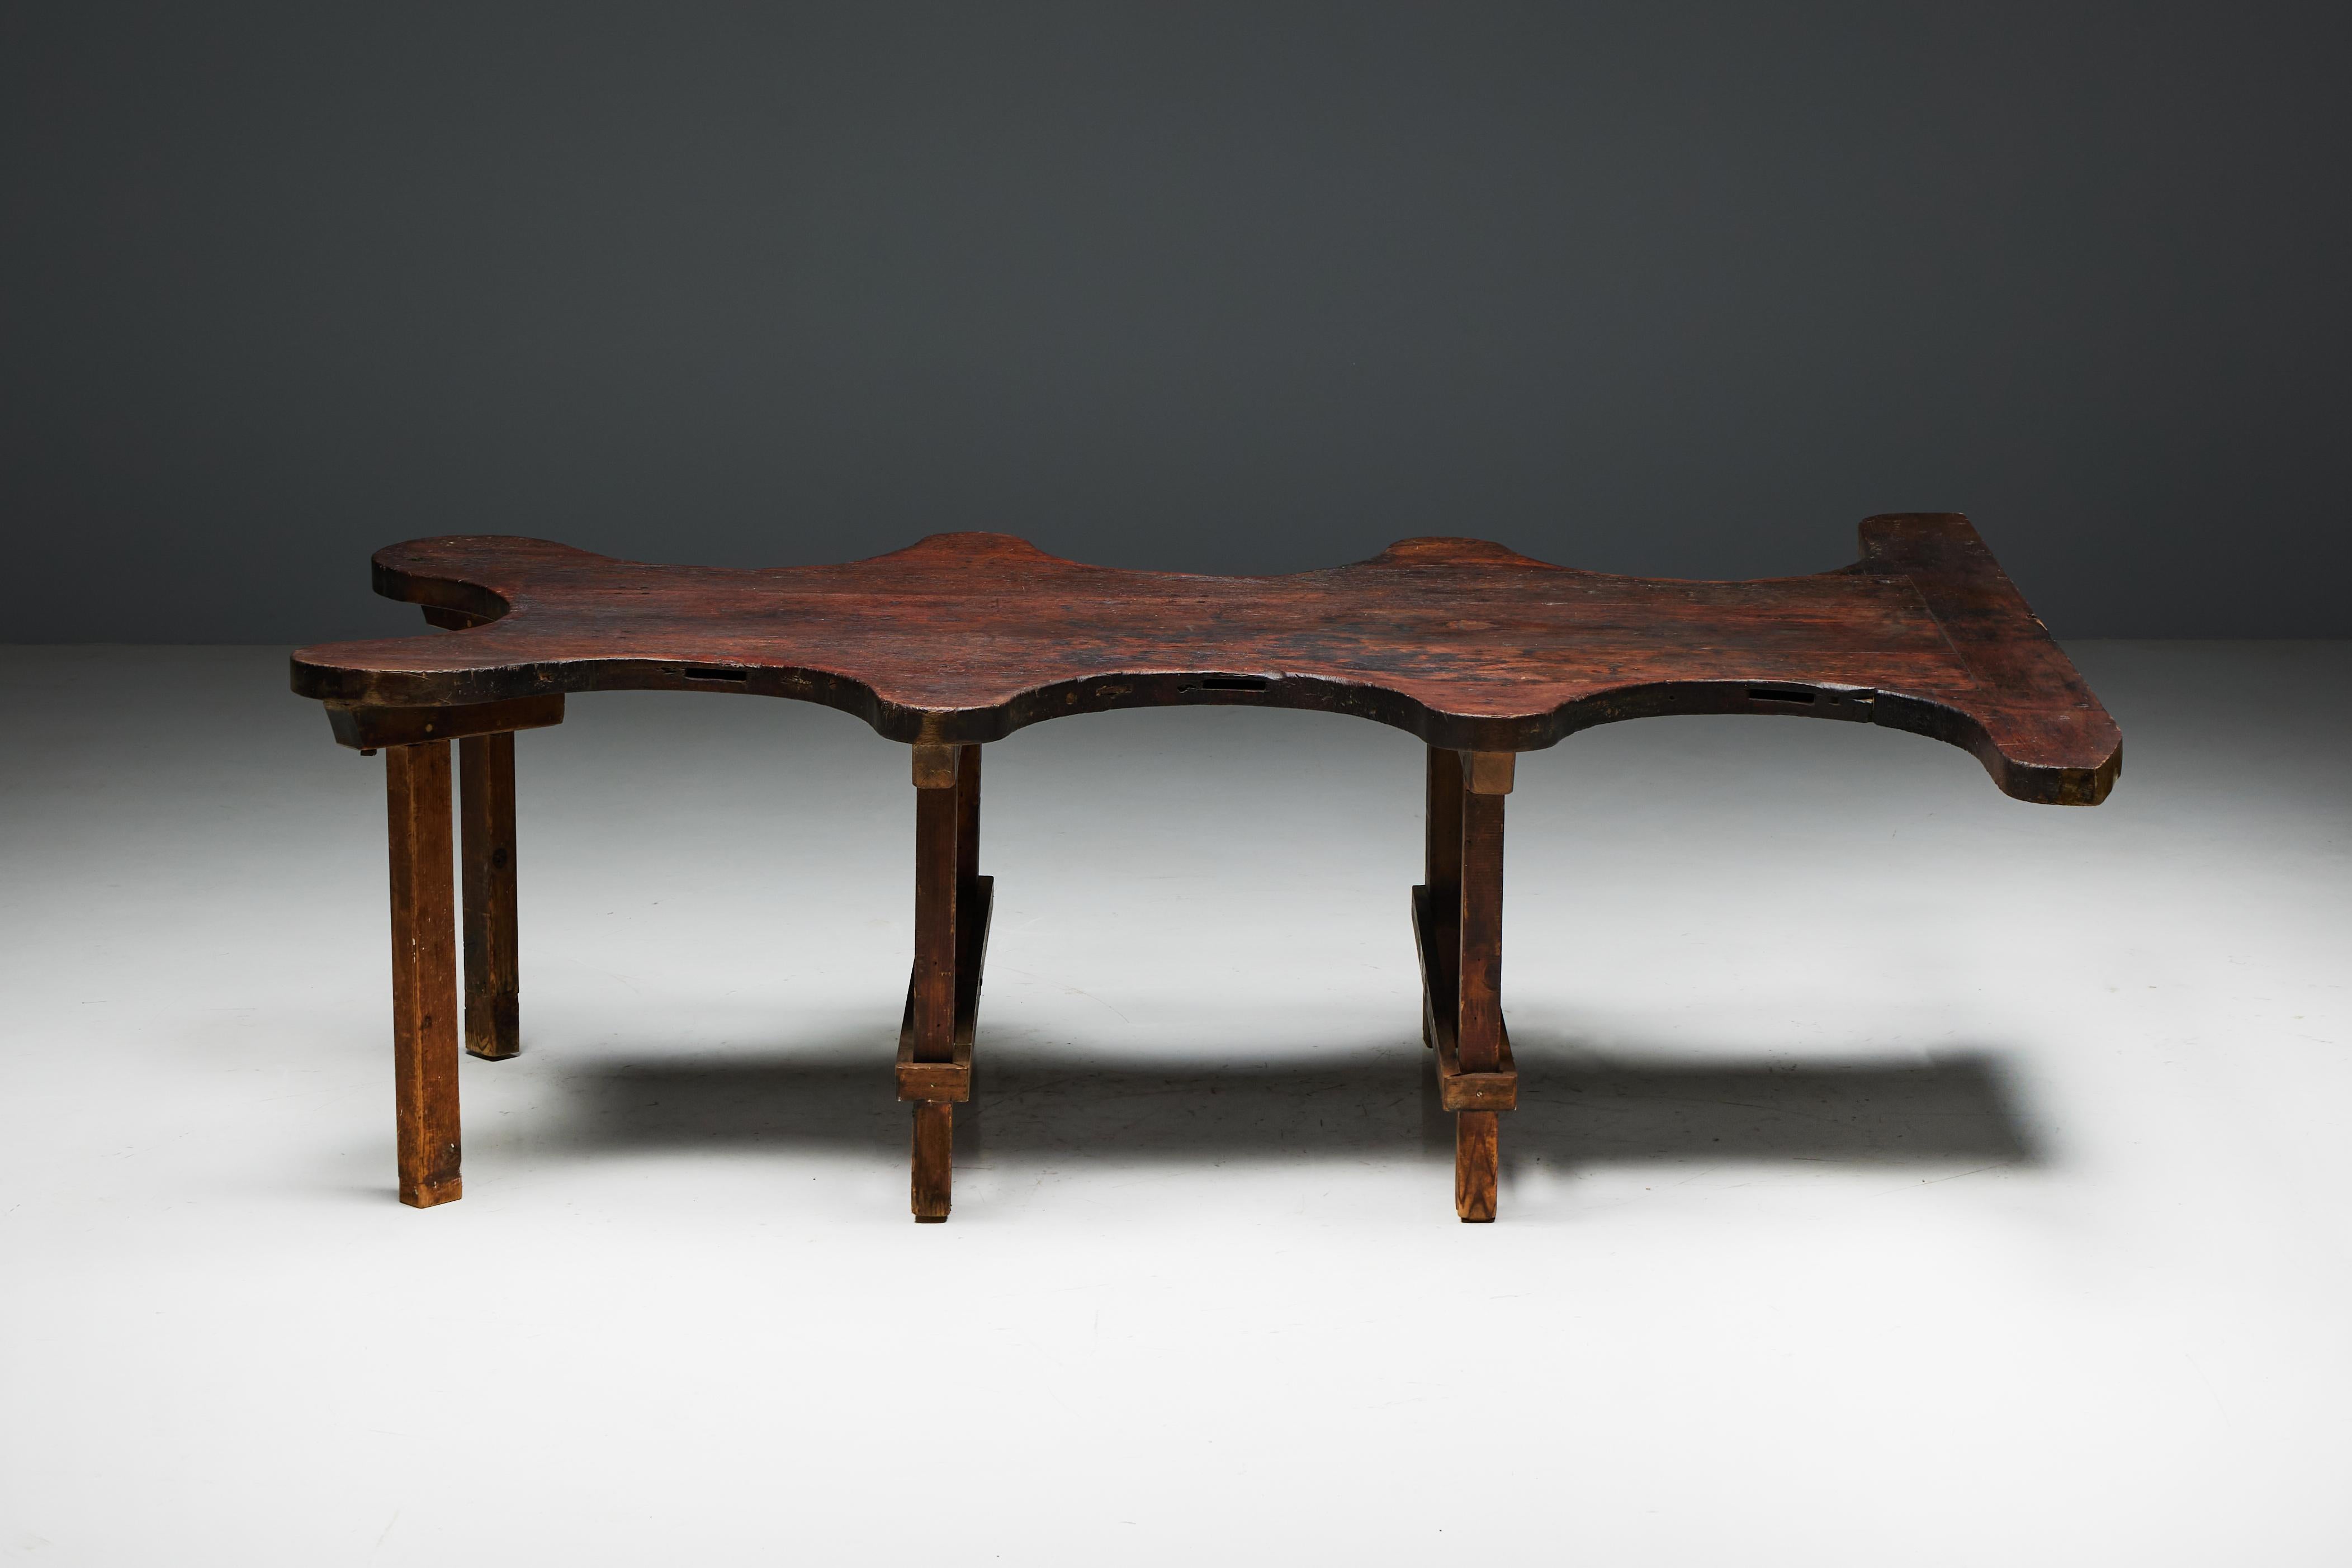 Oak Rustic Free Form Organic Table, France, Late 19th Century For Sale